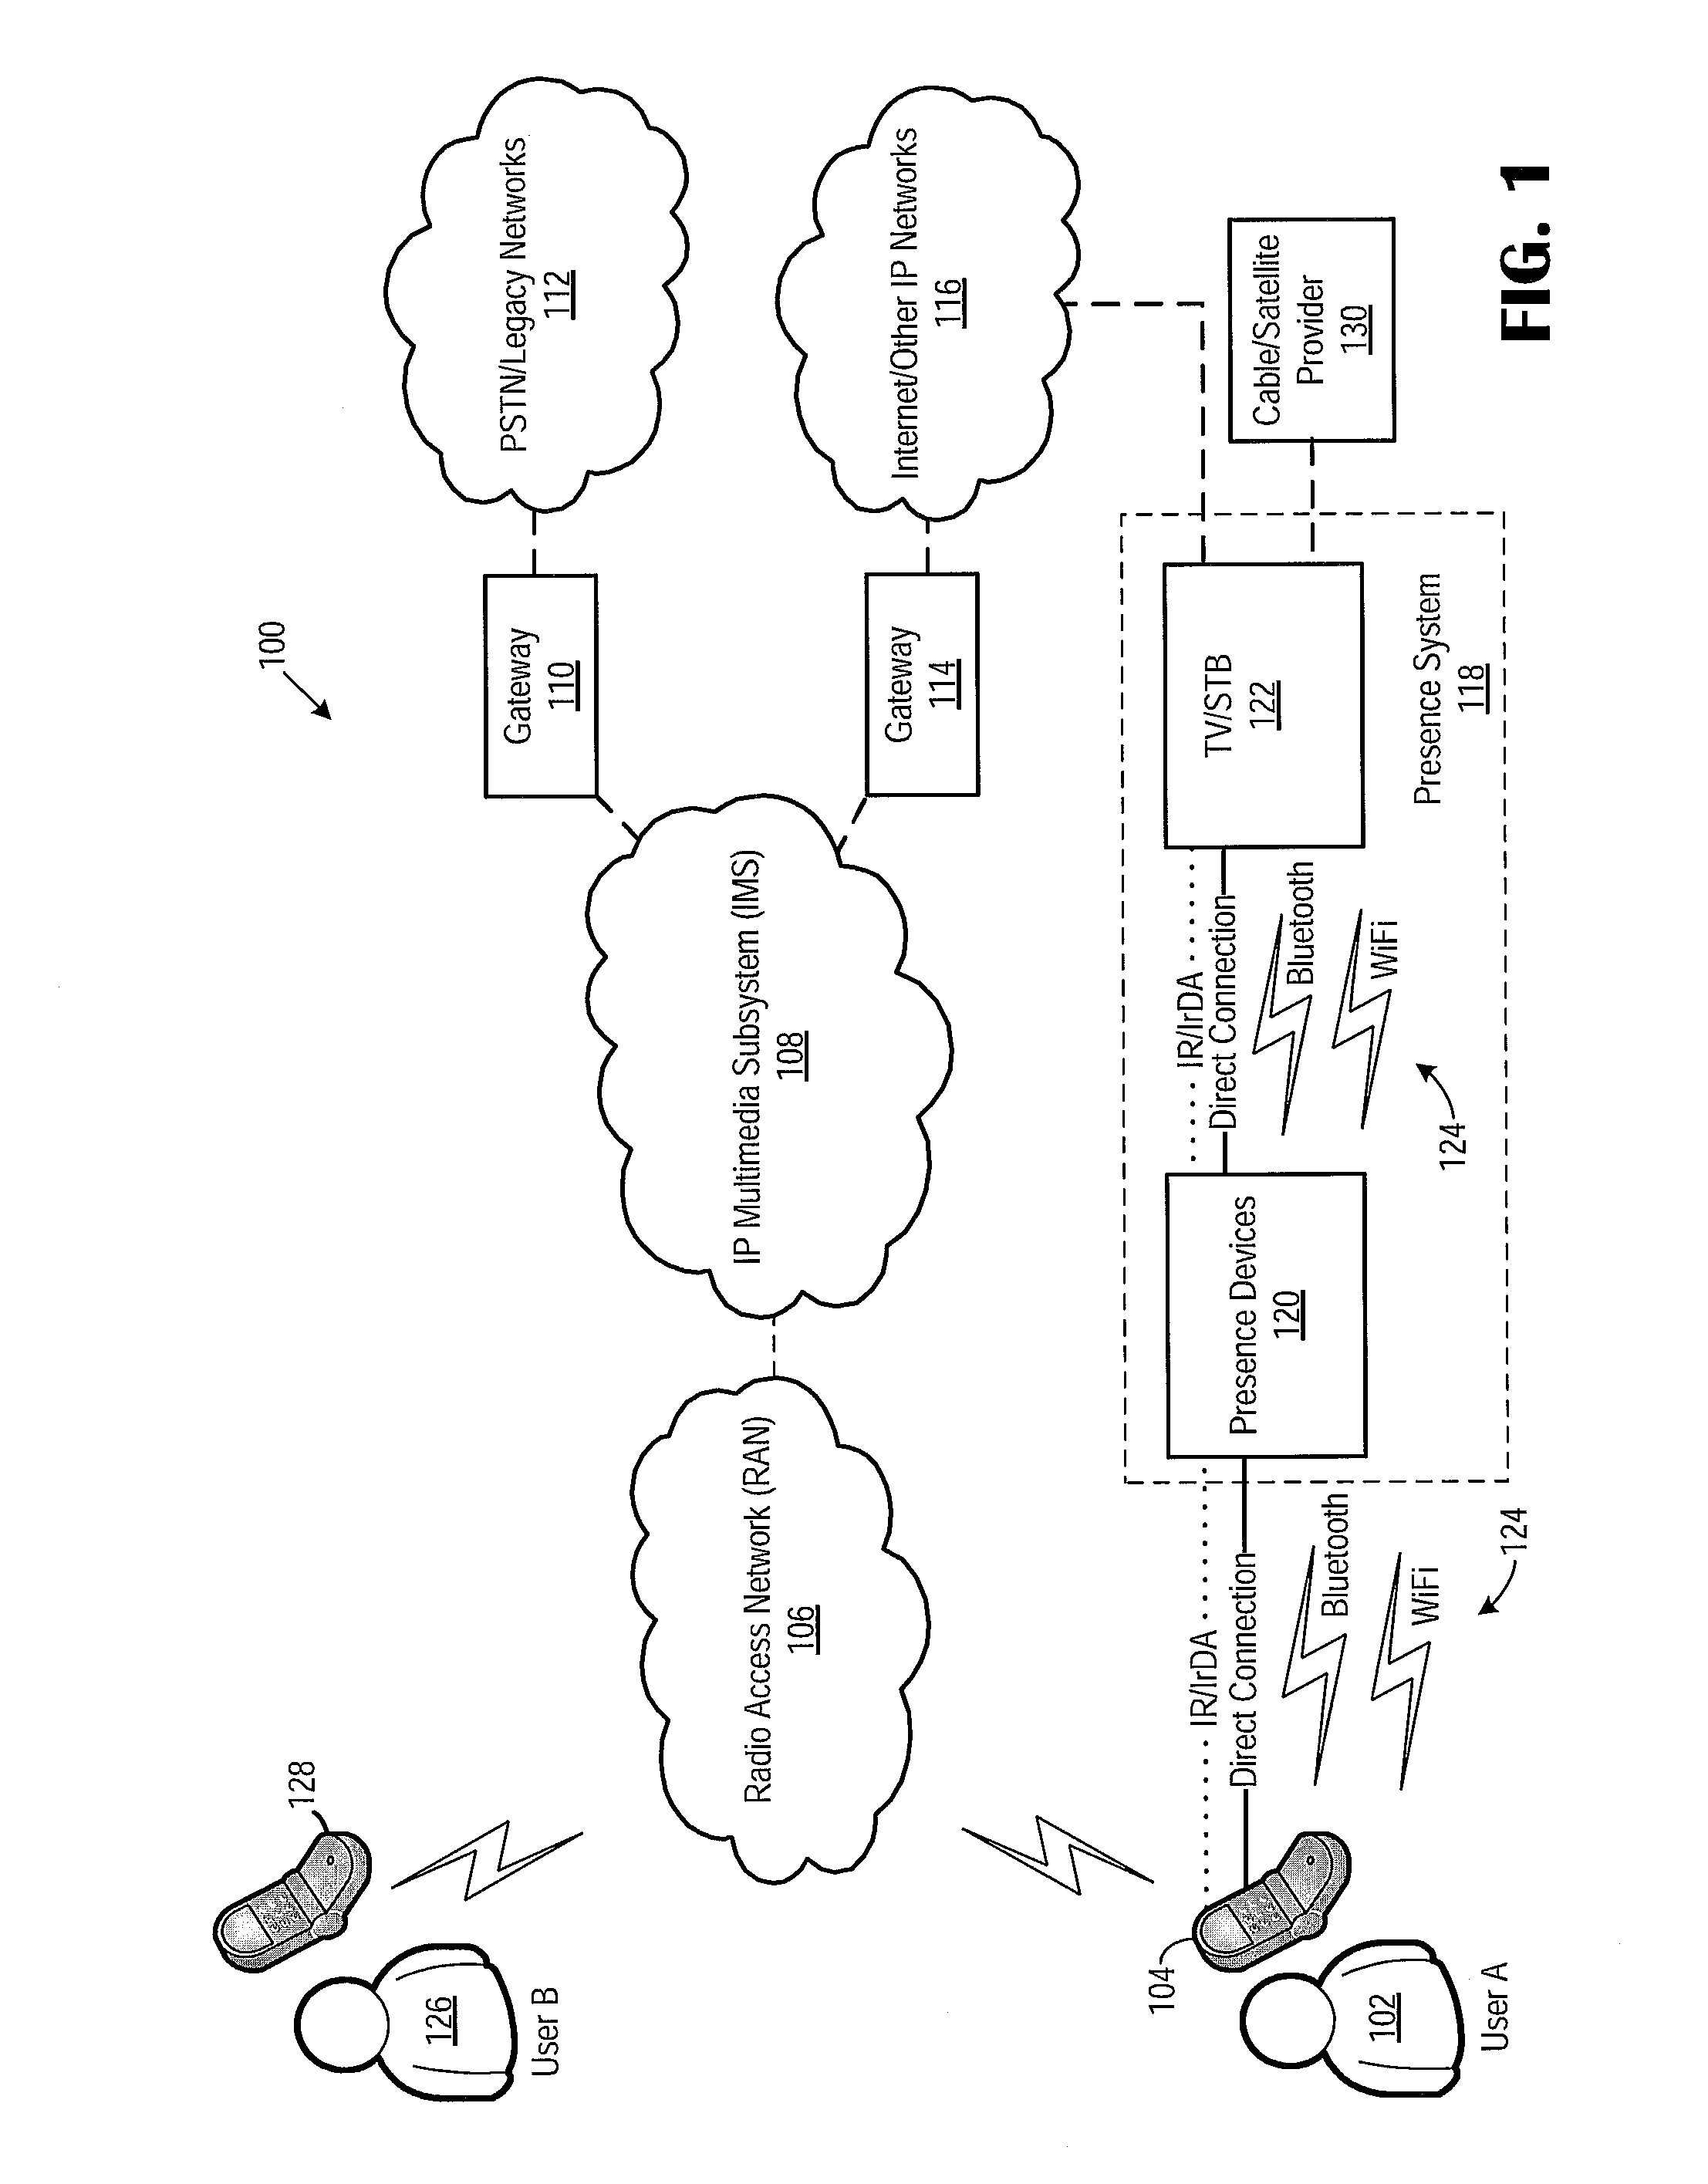 Systems and methods for updating user availability for wireless communication applications